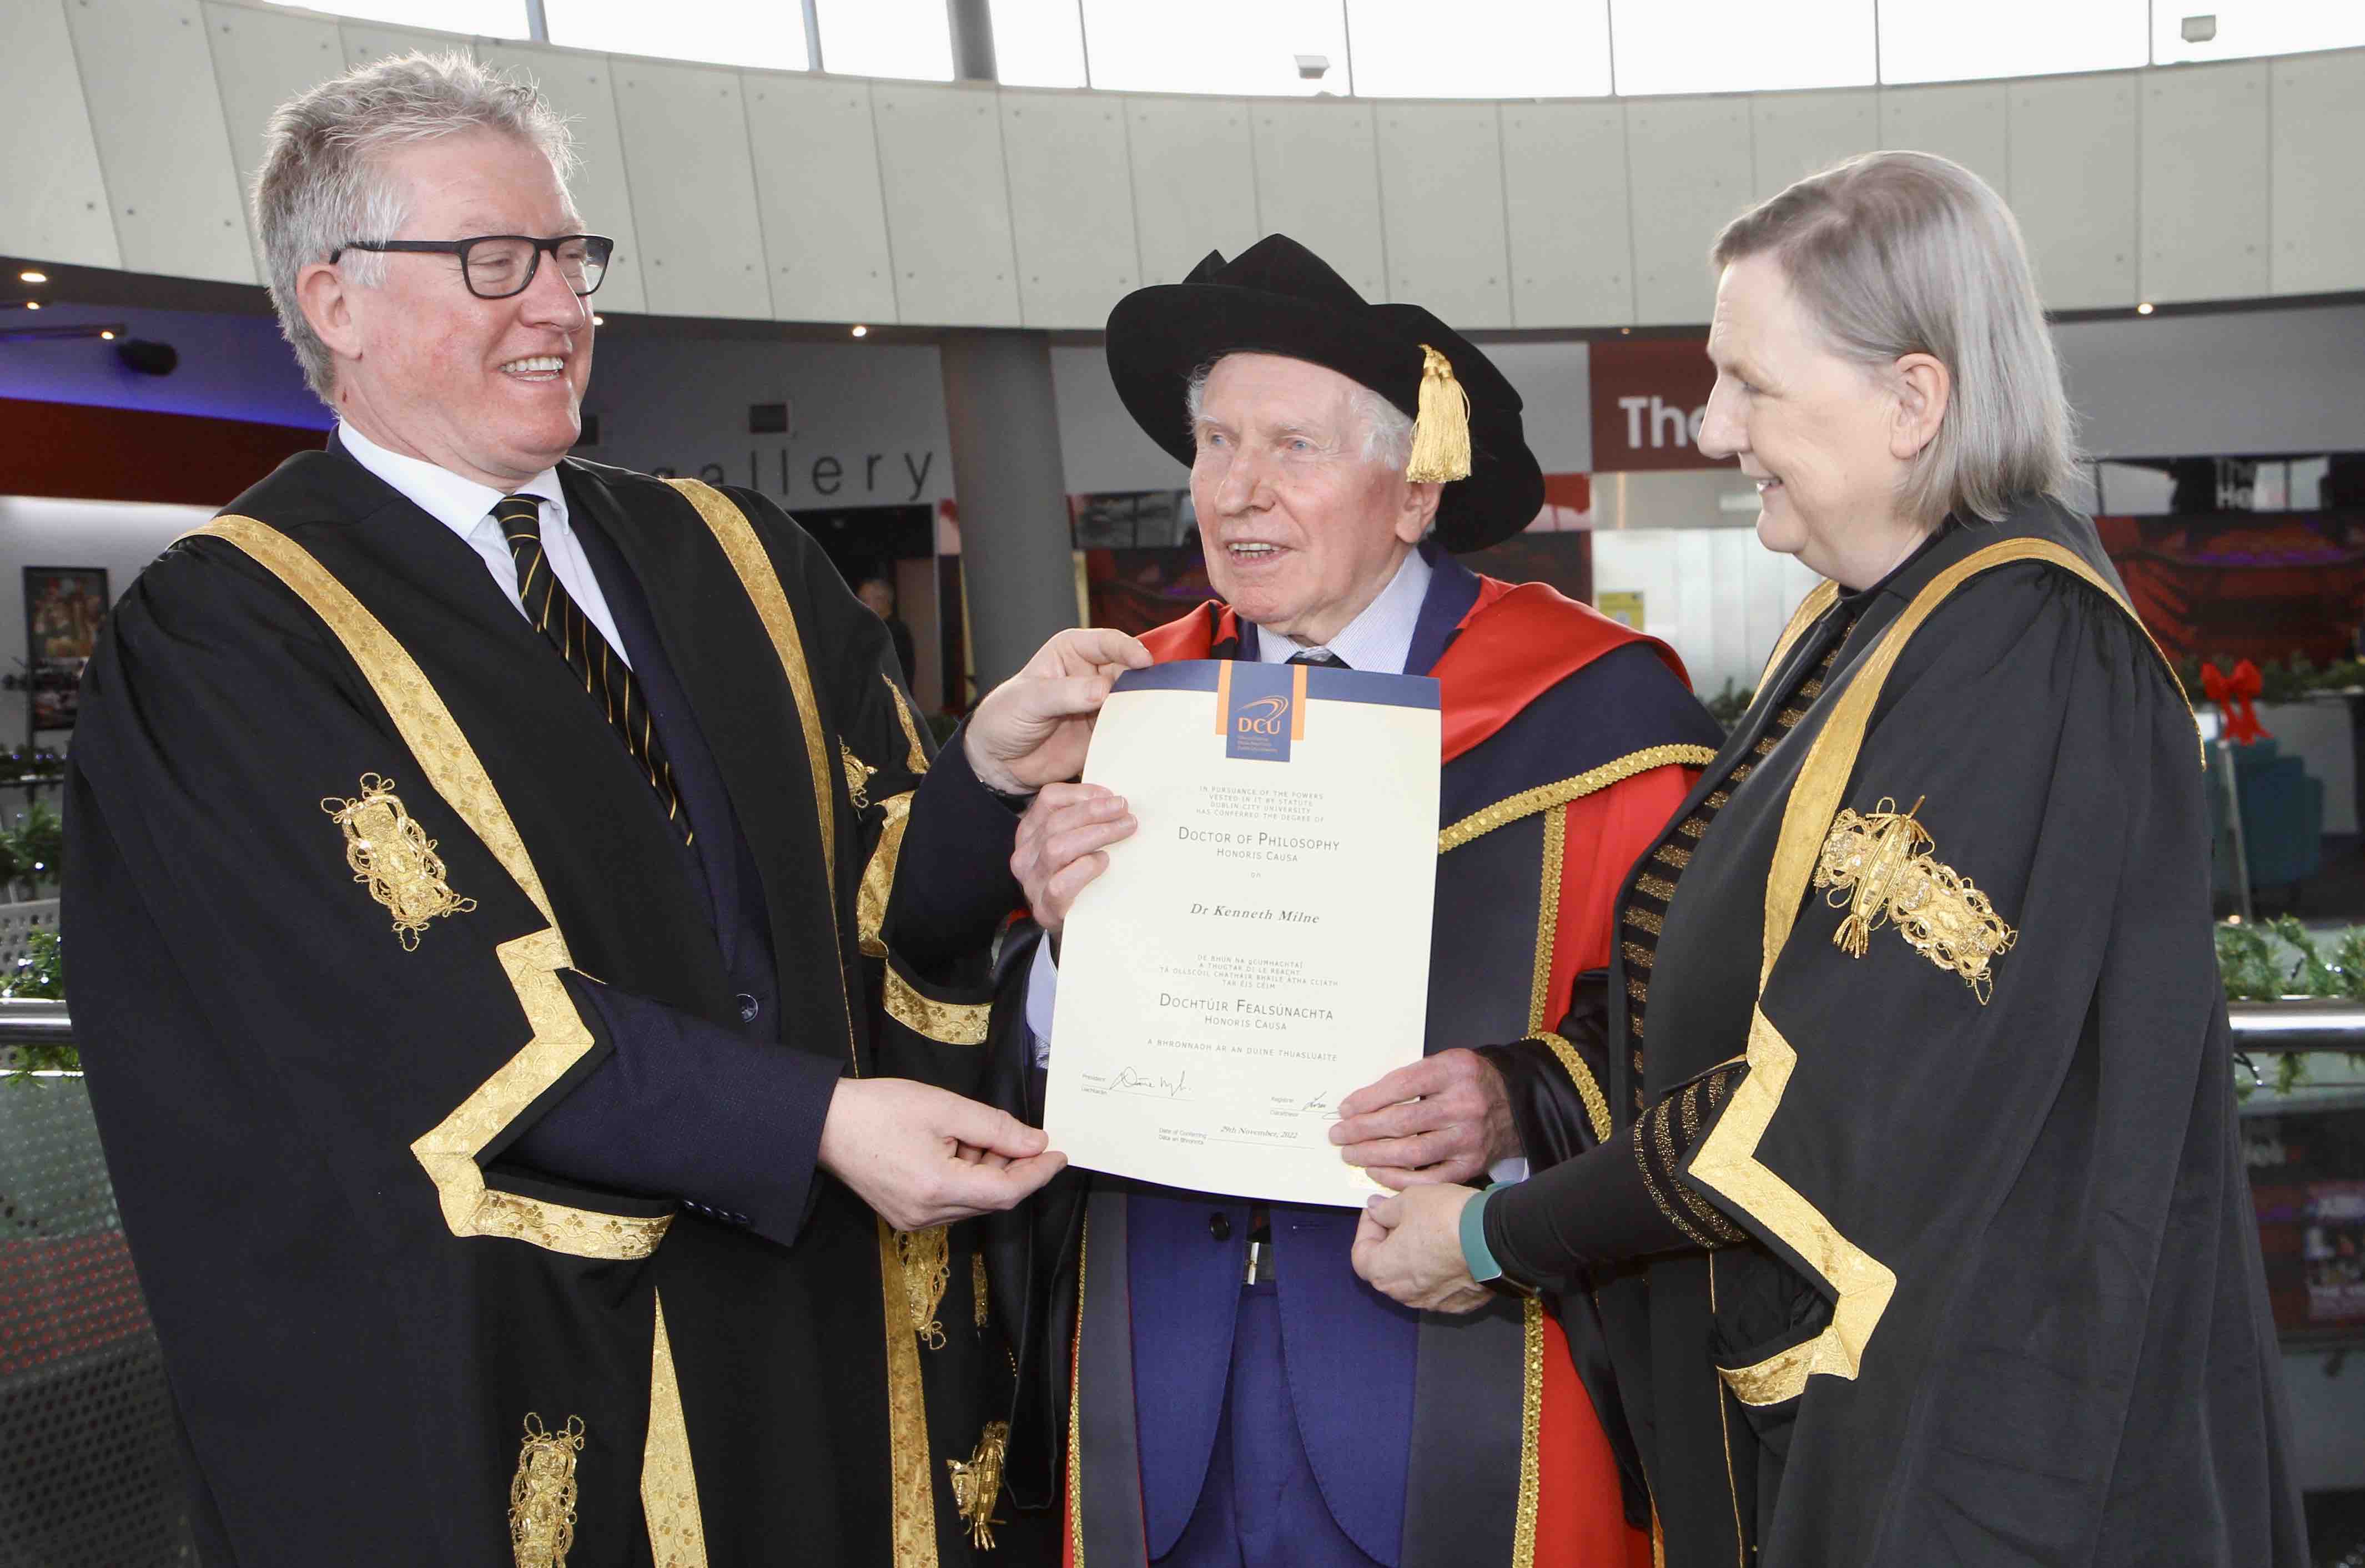 DCU President Prof Daire Keogh, Dr Kenneth Milne and DCU Chancellor Ms Brid Horan.